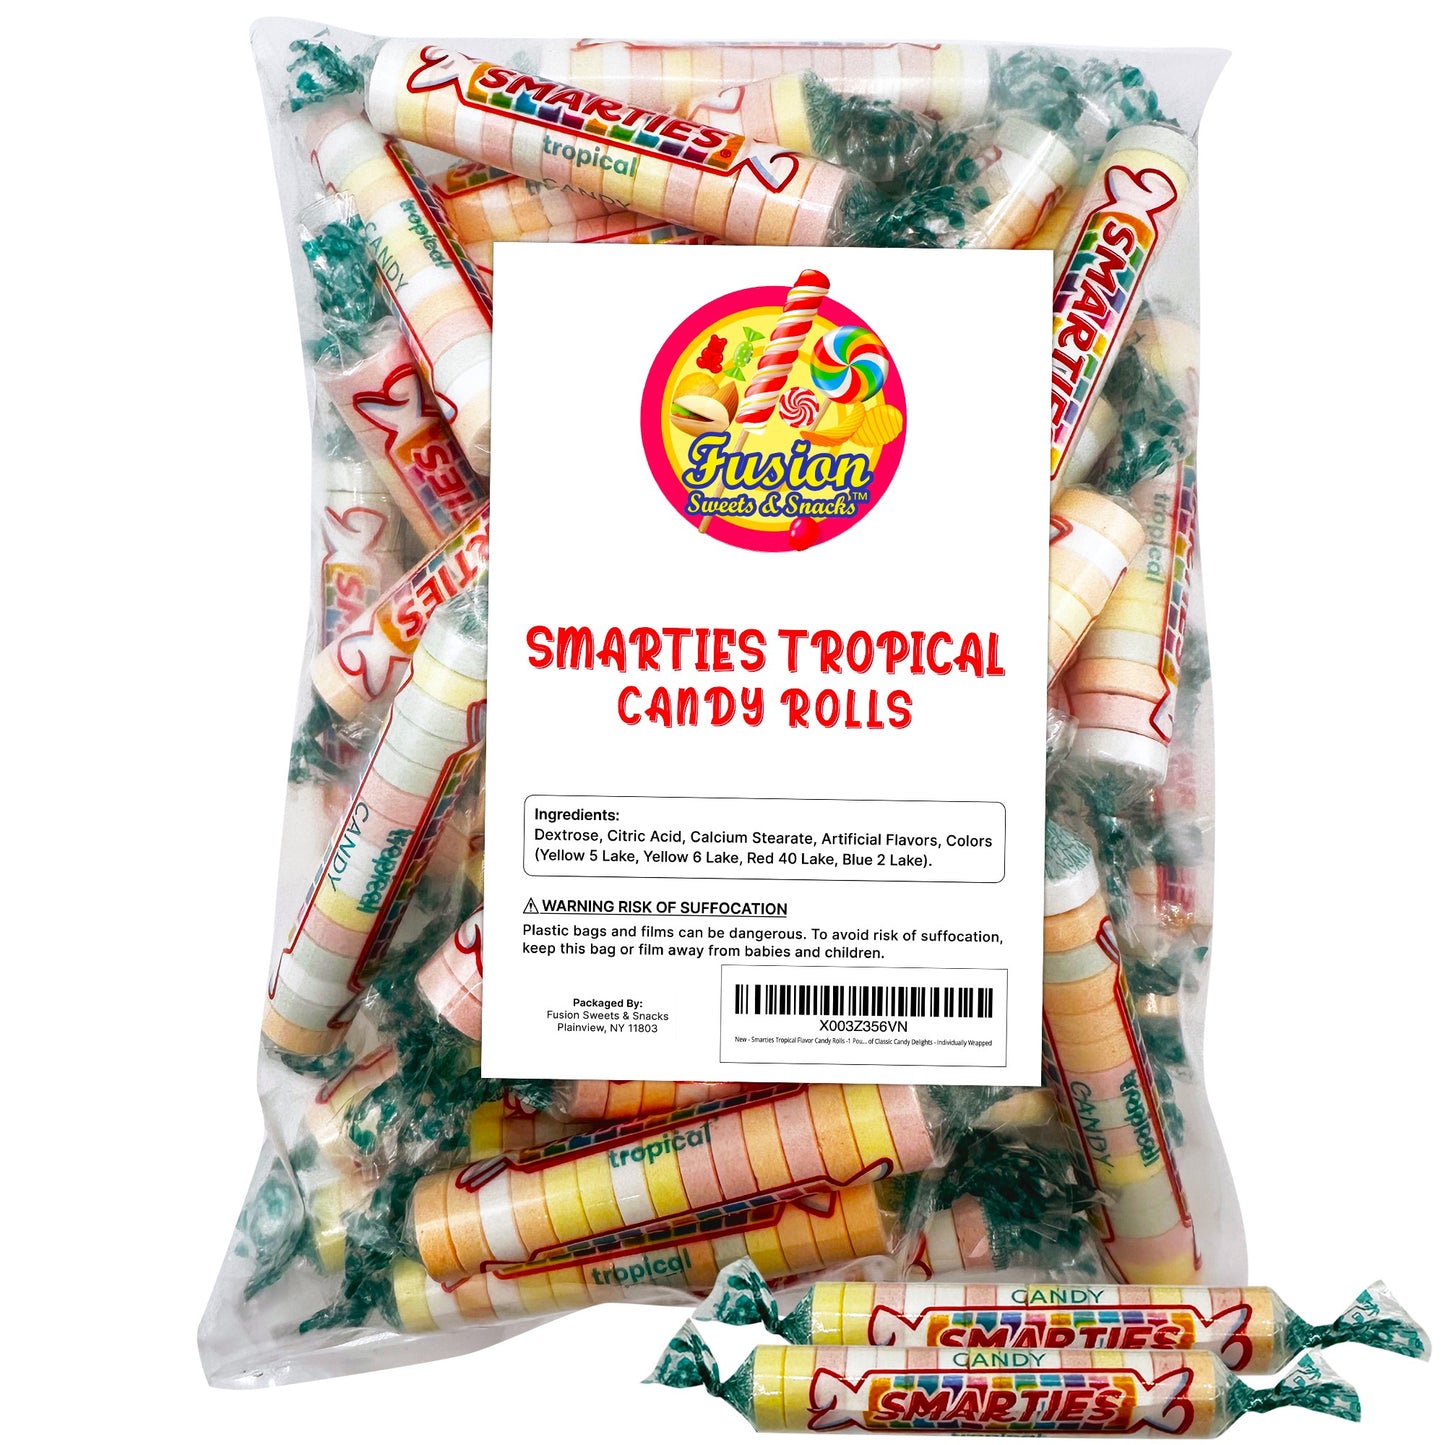 Smarties Tropical Flavor Candy Rolls -1 Pound Bag of Classic Candy Delights - Individually Wrapped Bulk Smarties Candies